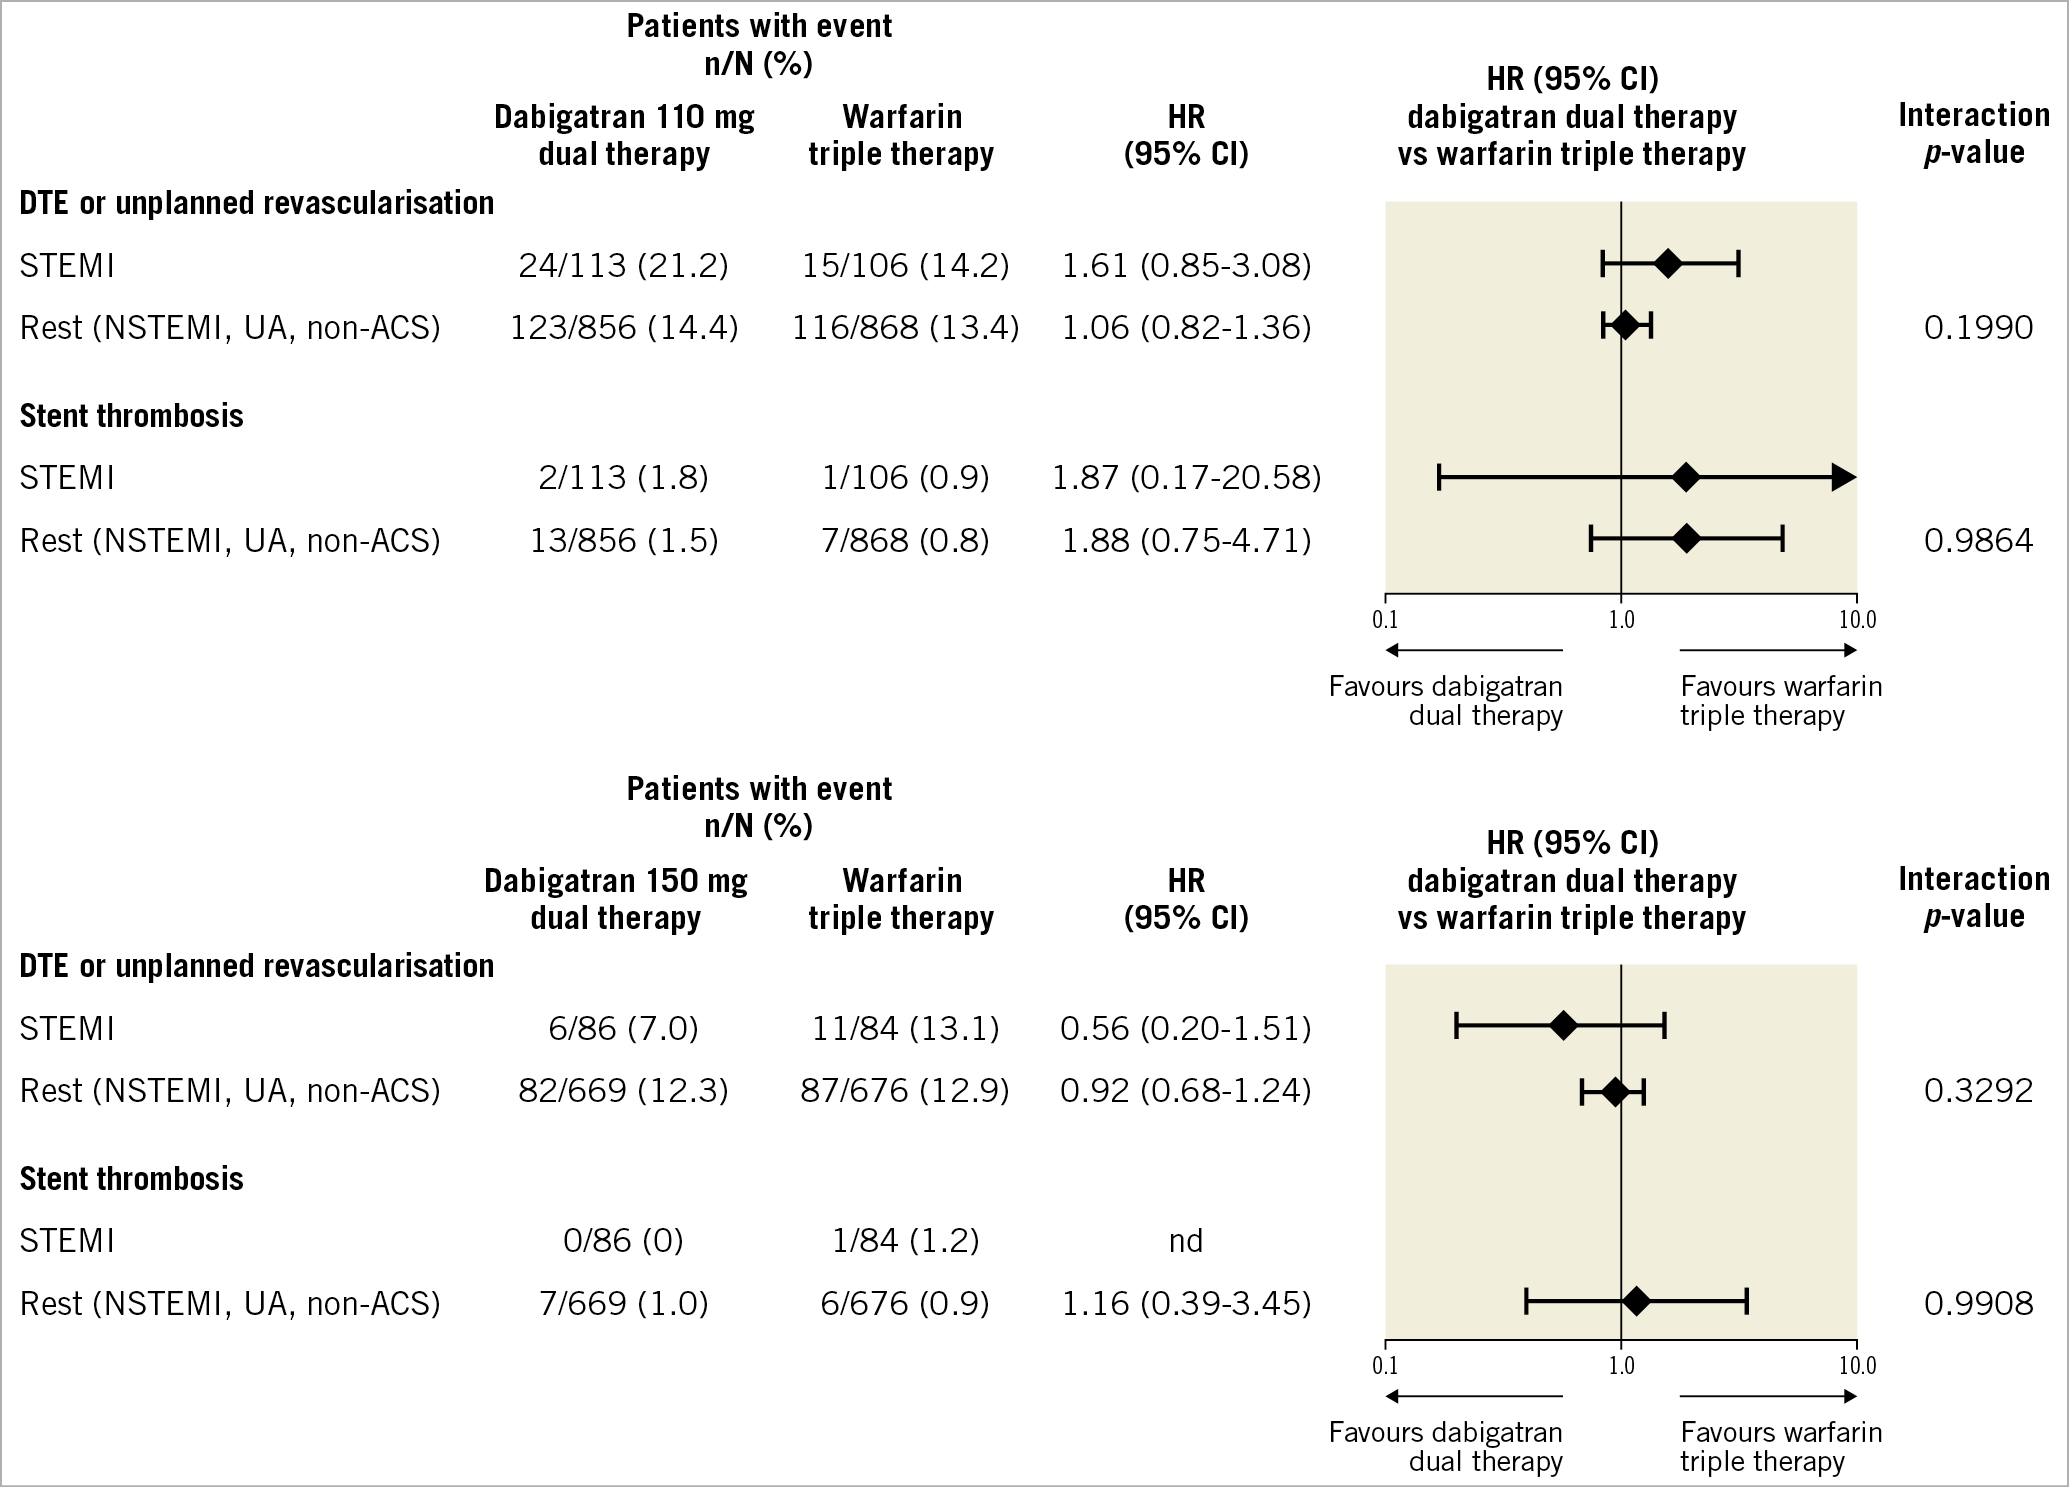 Figure 2. Thrombotic endpoints in patients with STEMI versus others treated with dabigatran dual therapy versus warfarin triple therapy. HRs and Wald CIs from Cox proportional hazards model. For the comparison dabigatran 110 mg dual therapy versus warfarin triple therapy, the model is stratified by age, non-elderly versus elderly (<70 or ≥70 years in Japan and <80 or ≥80 years elsewhere). For the comparison dabigatran 150 mg dual therapy versus warfarin triple therapy, an unstratified model is applied and elderly patients outside the USA were excluded. Exploratory interaction p-values for the interaction between treatment and subgroup. ACS: acute coronary syndrome; CI: confidence interval; DTE: death, thromboembolic events; HR: hazard ratio; nd: not determined; NSTEMI: non-ST-segment elevation myocardial infarction; STEMI: ST-elevation myocardial infarction; UA: unstable angina